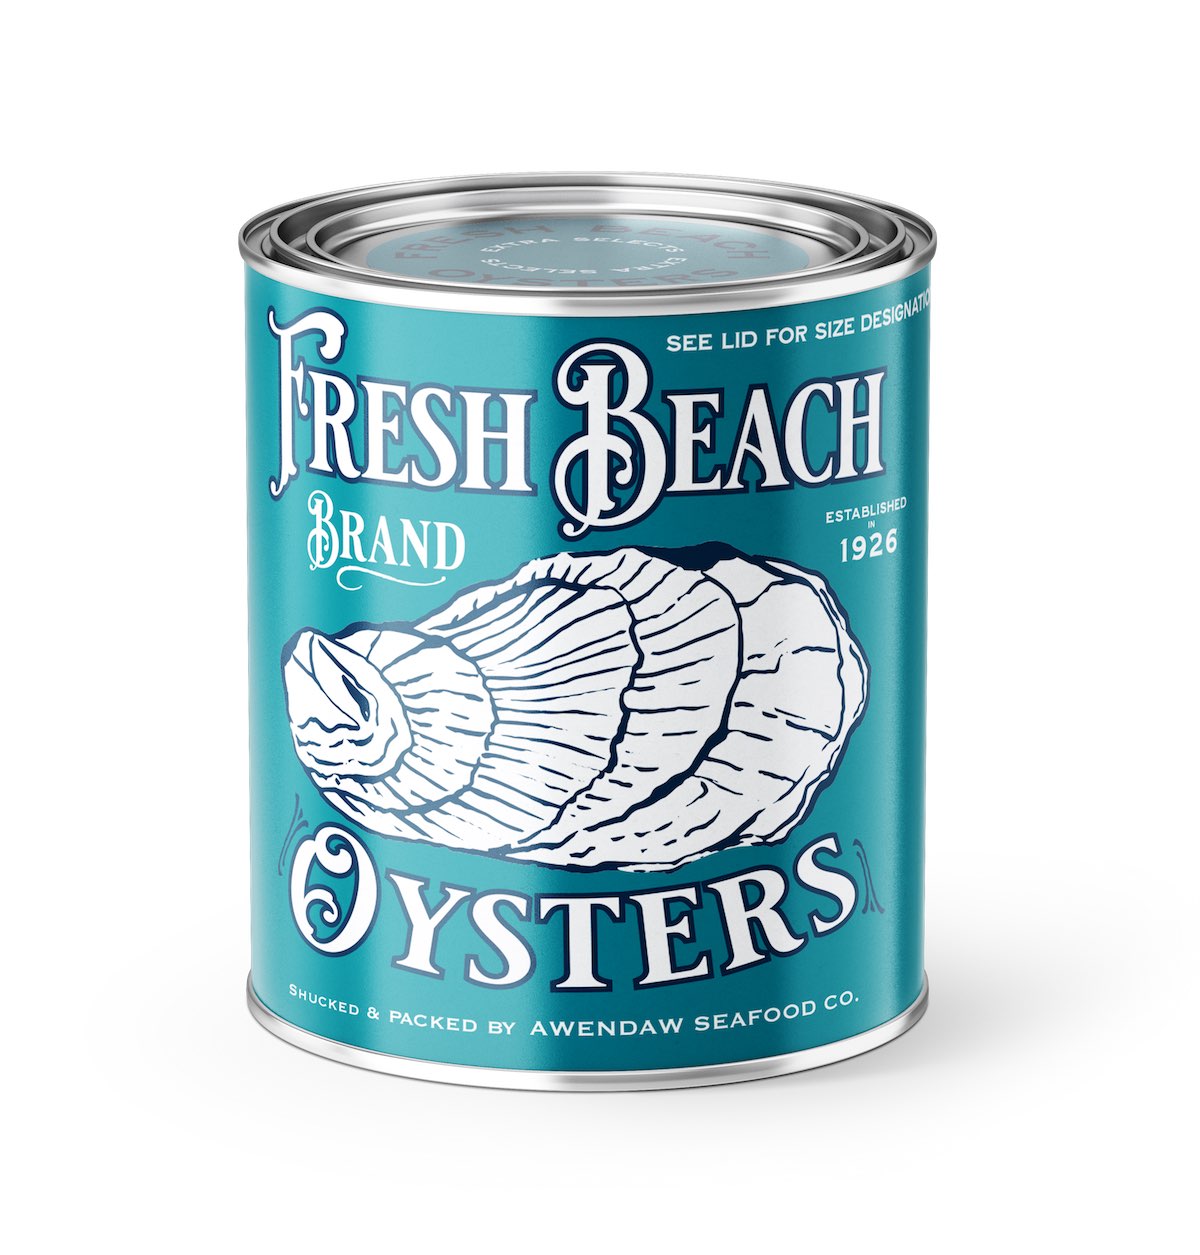 Fresh Beach Oysters Vintage Vintage Style Candle